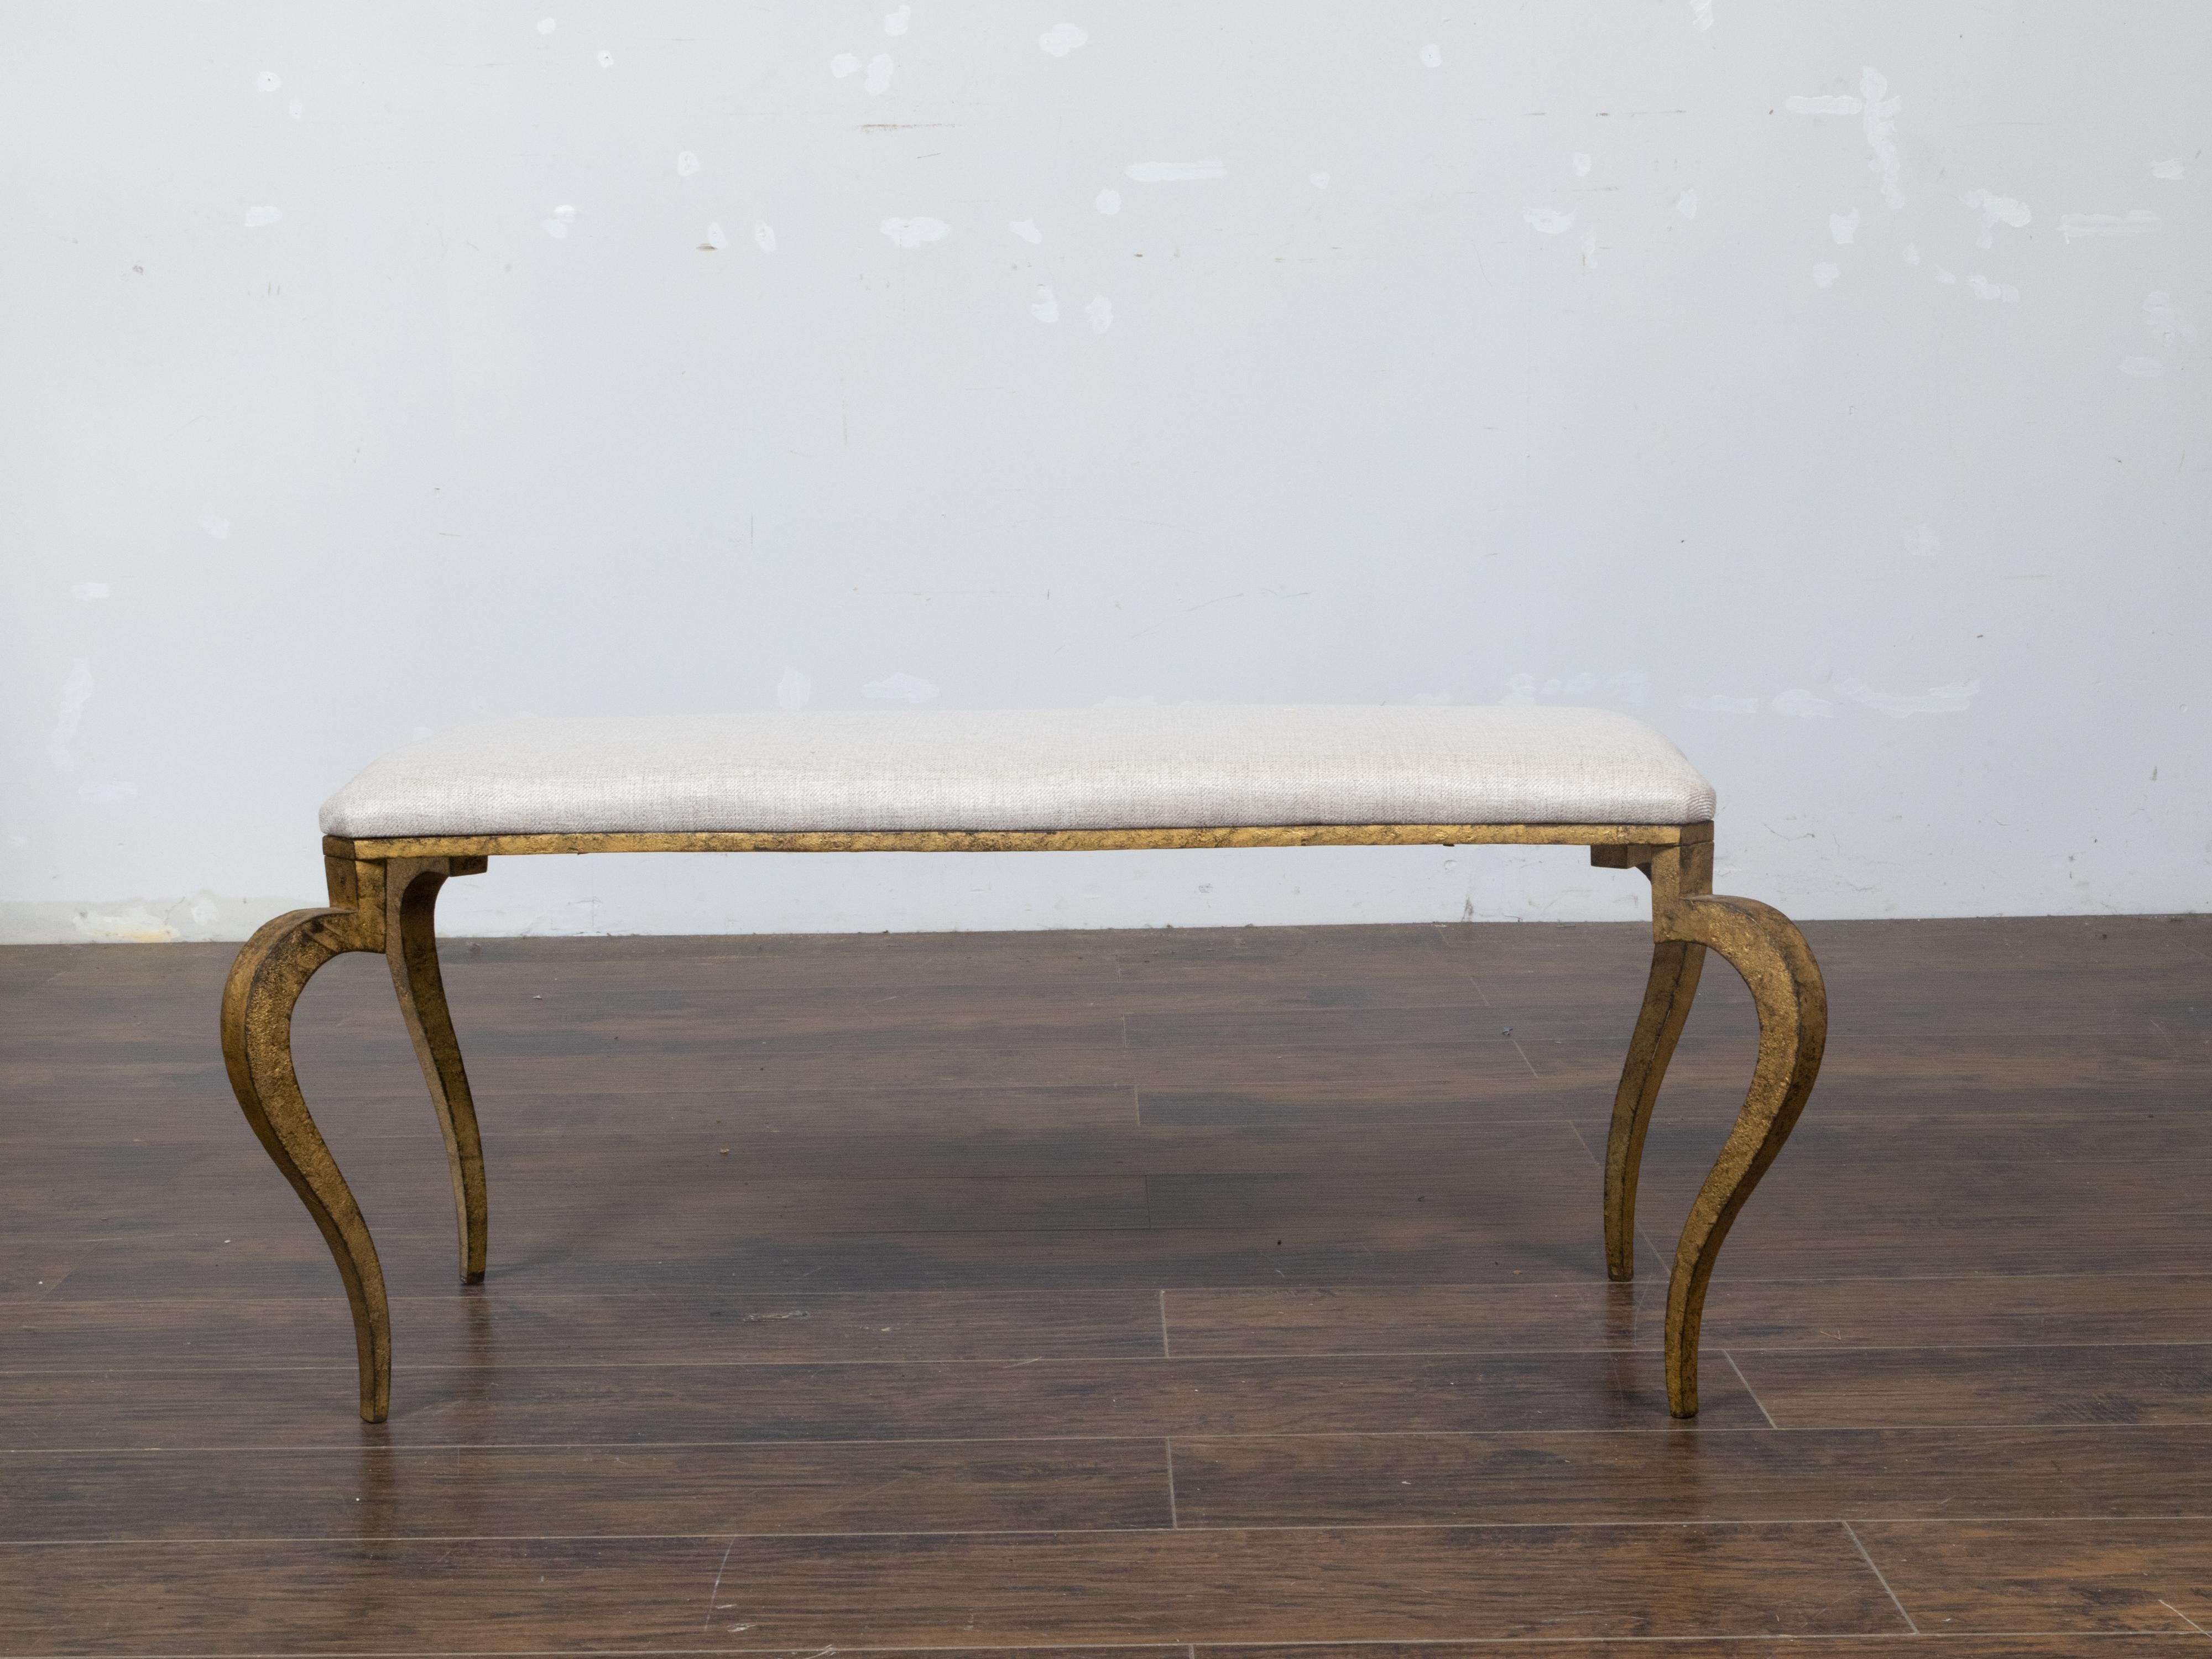 20th Century Art Deco French Gilt Iron Bench with Curving Legs and New Linen Upholstery For Sale